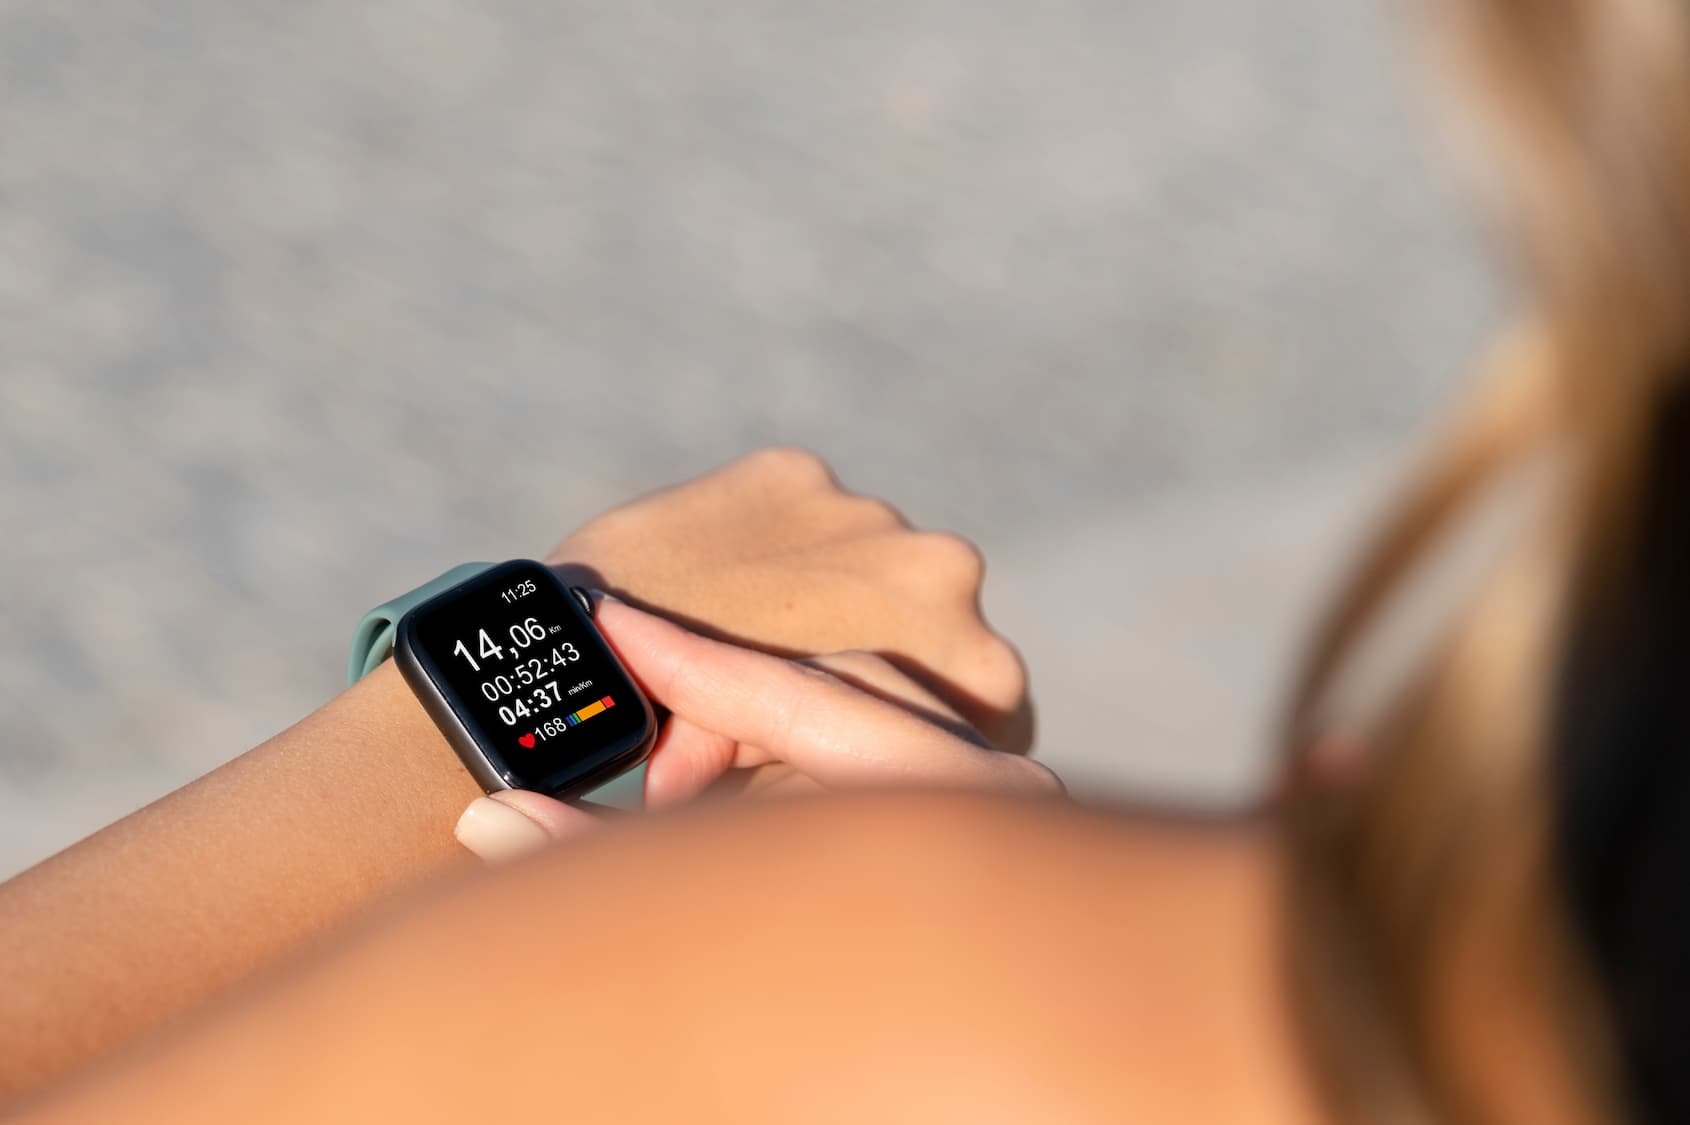 Smartwatches that measure our heartrate, sleep time, health metrics